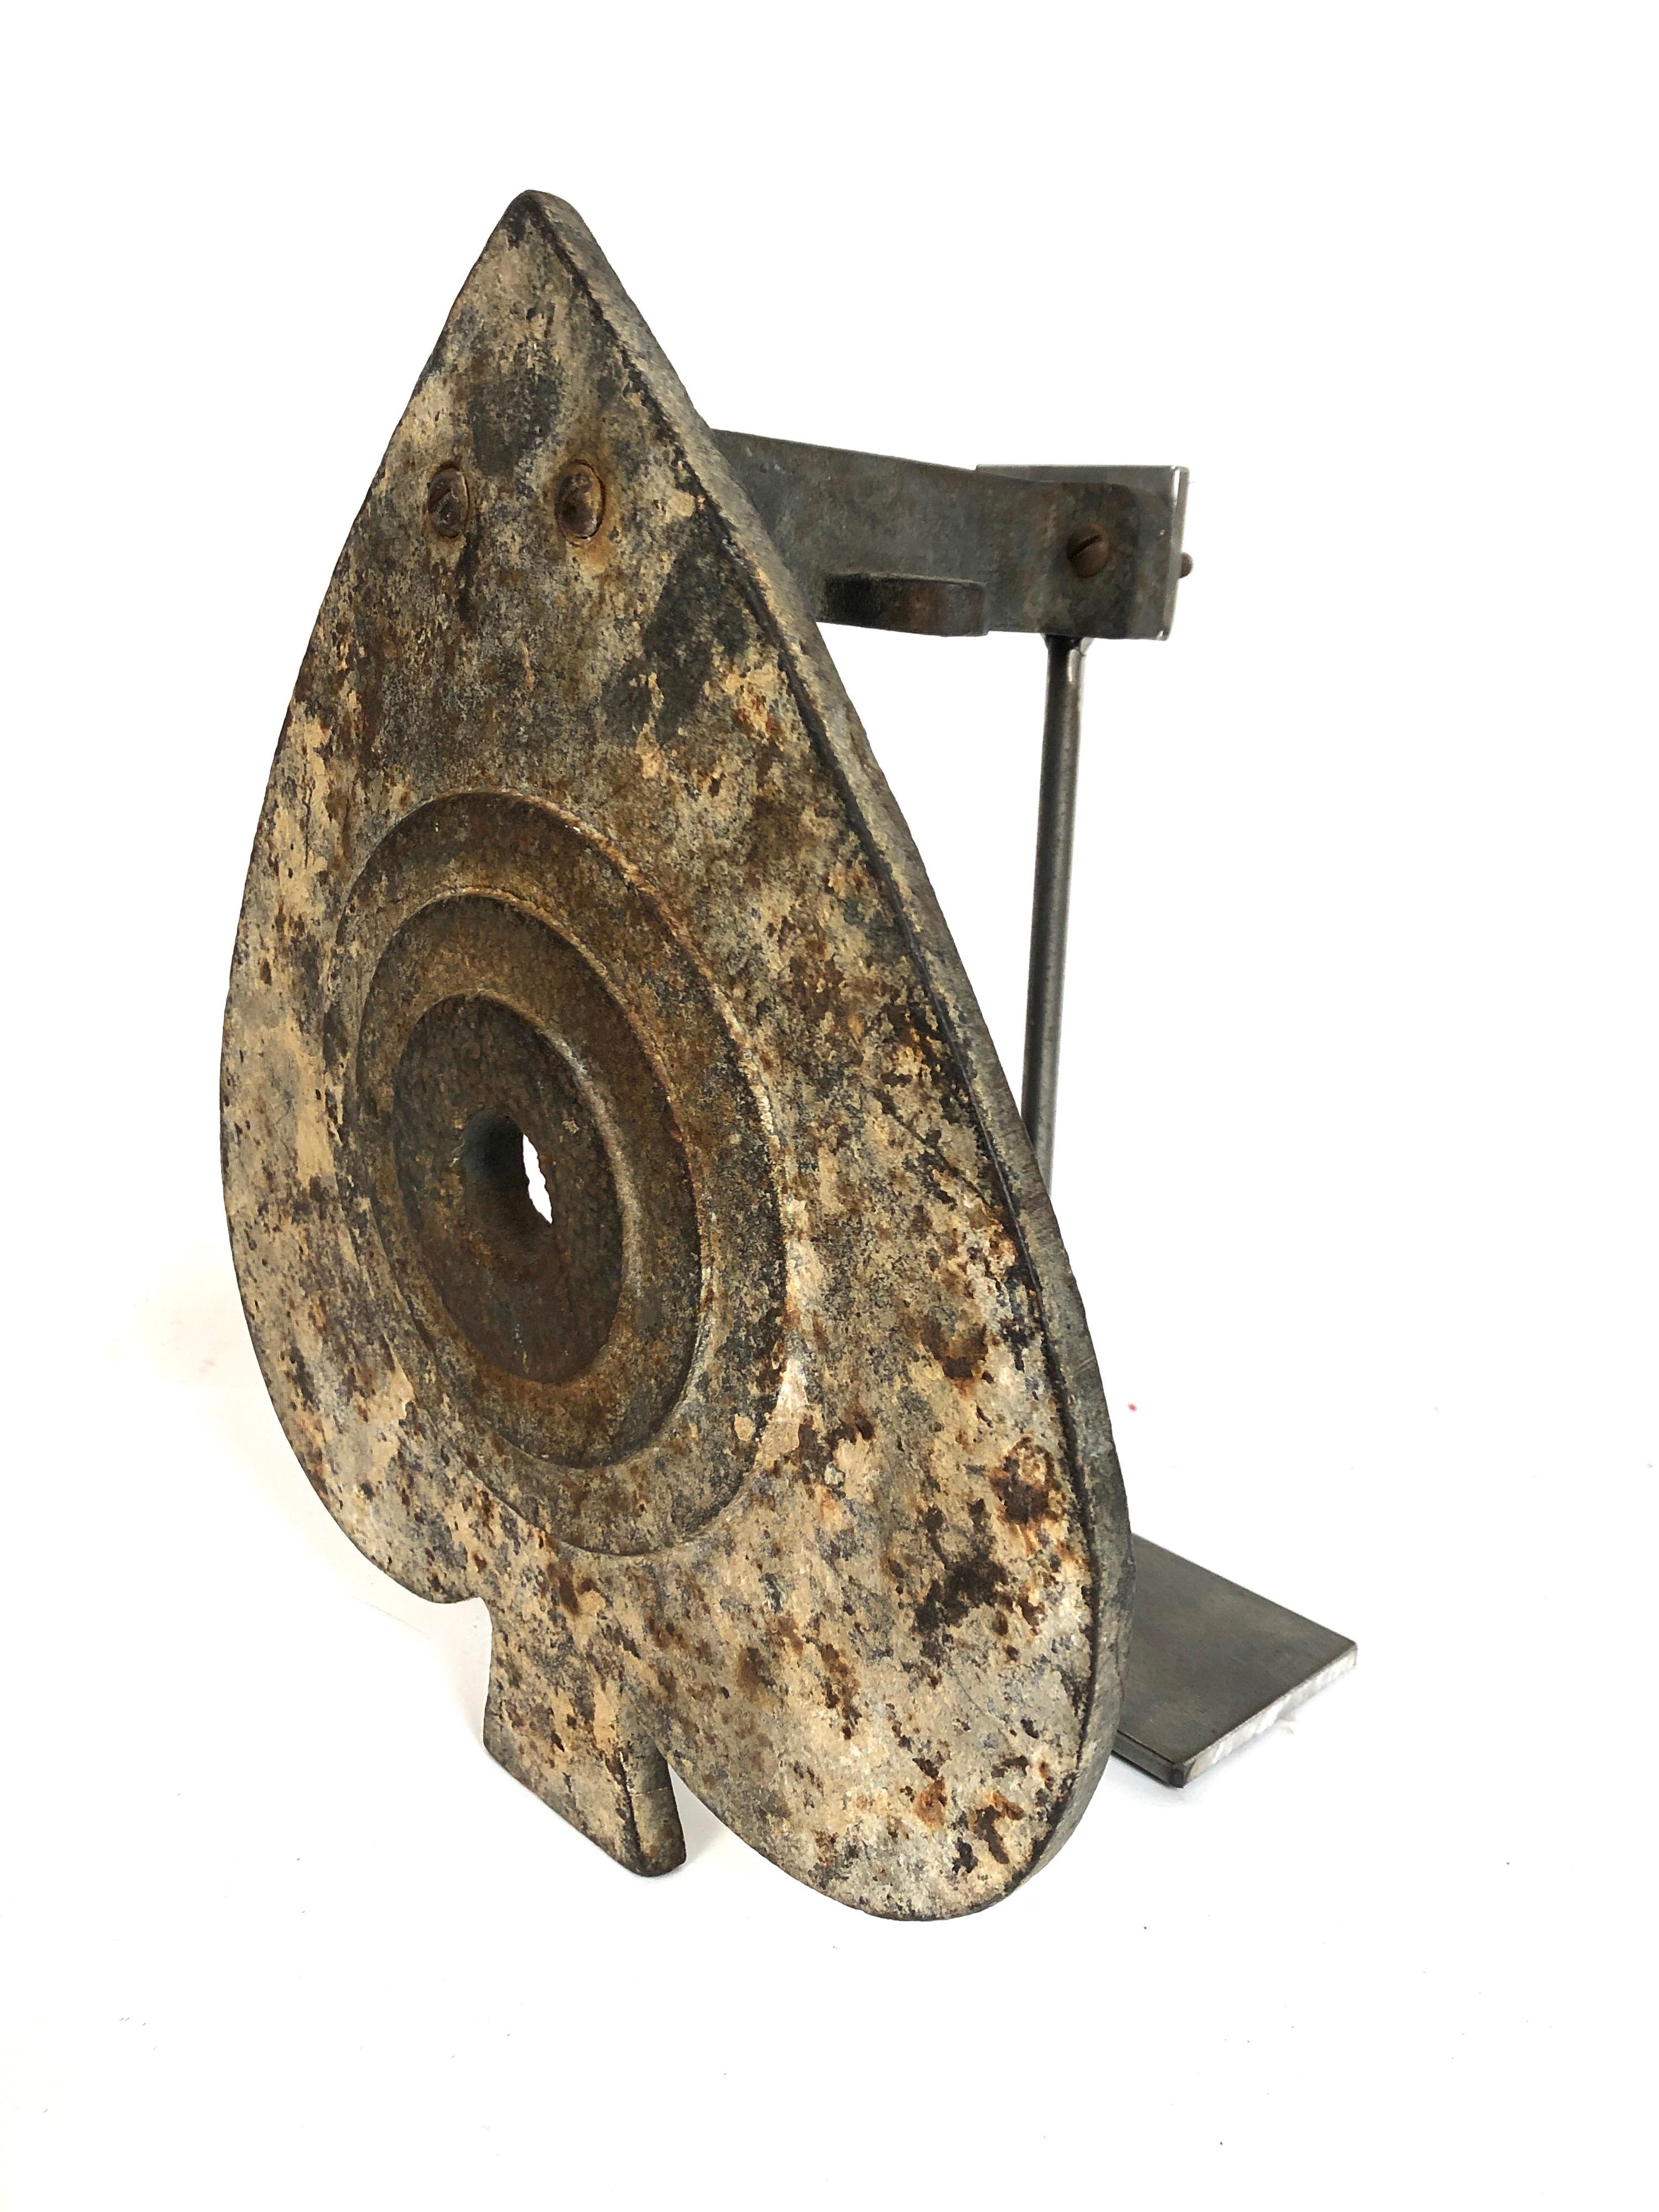 A custom mounted antique cast iron shooting gallery target in the form of a spade. Raised concentric circle pattern. Original untouched surface with remains of white paint. No cracks or breaks.